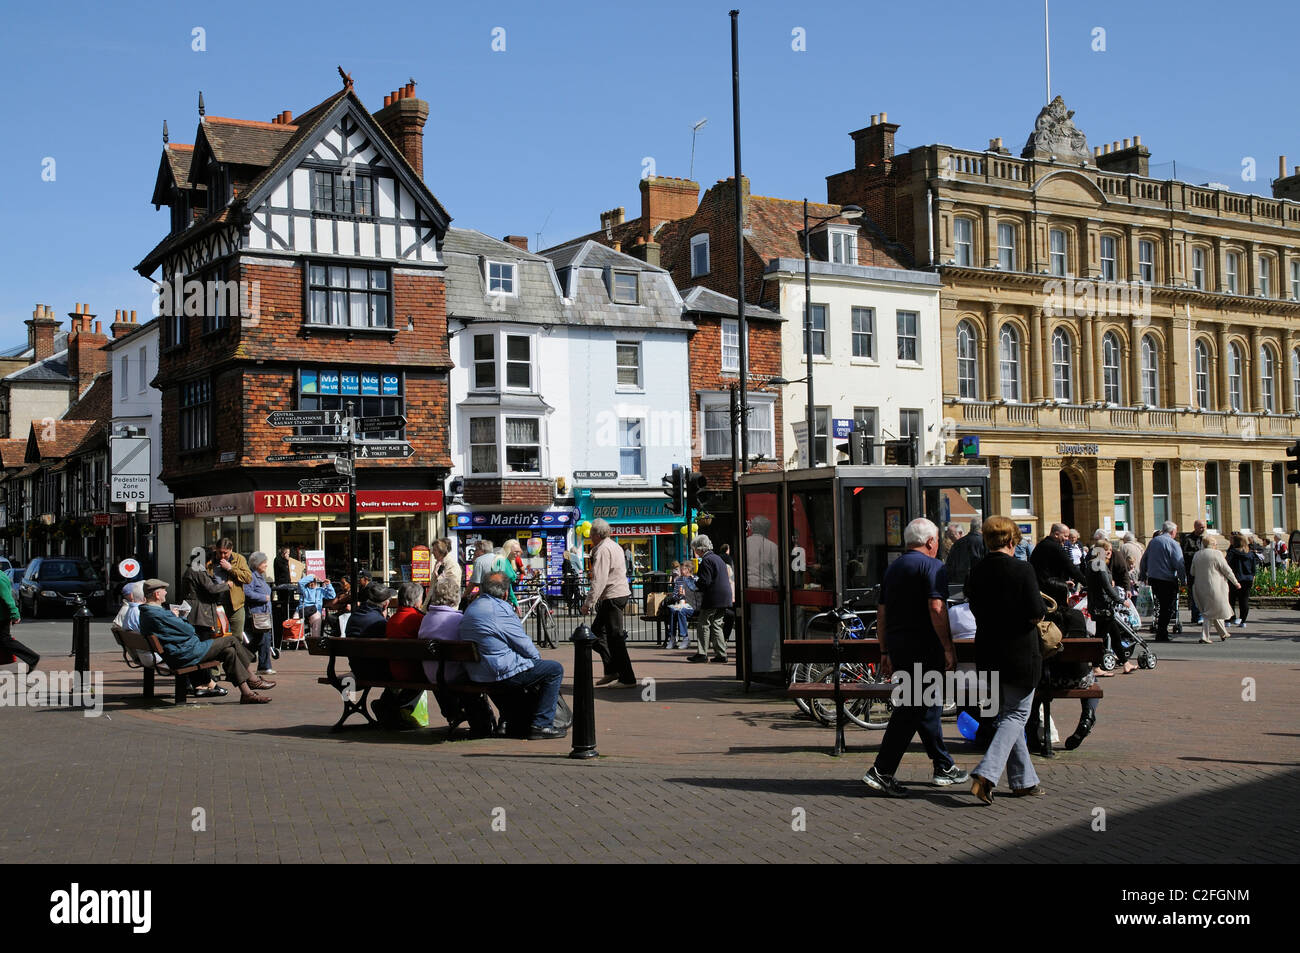 Salisbury town centre shopping area with seating for the public to relax. Wiltshire England UK Stock Photo